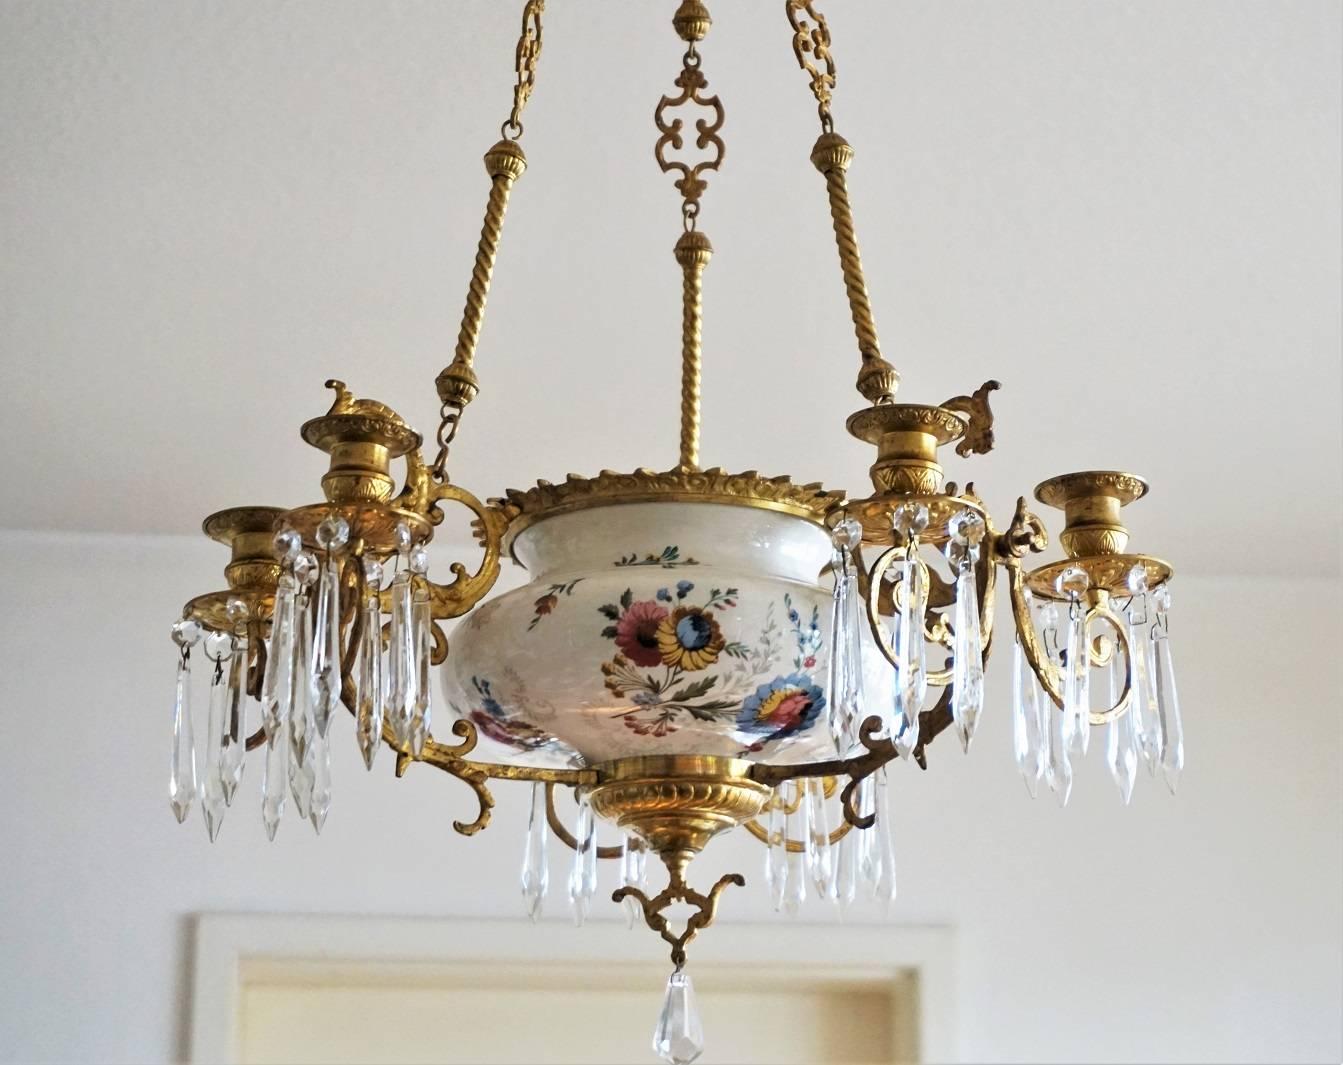 19th Century French Dóre Bronze and Faience Candle Chandelier, Choisy-le-Roy (Französisch)